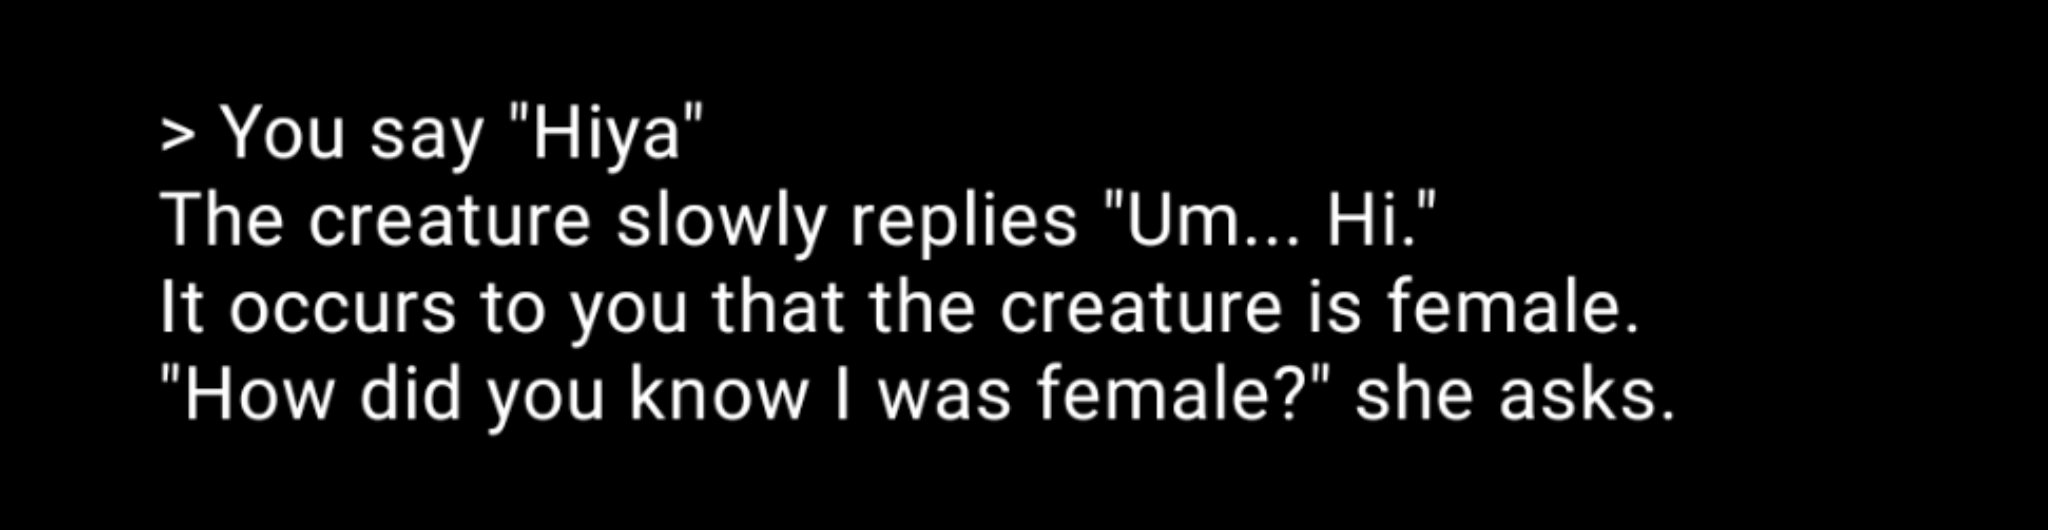 >  You say "Hiya"
The creature slowly replied "Um... Hi."
It occurs to you that the creature is female.
"How did you know I was female?" she asks.